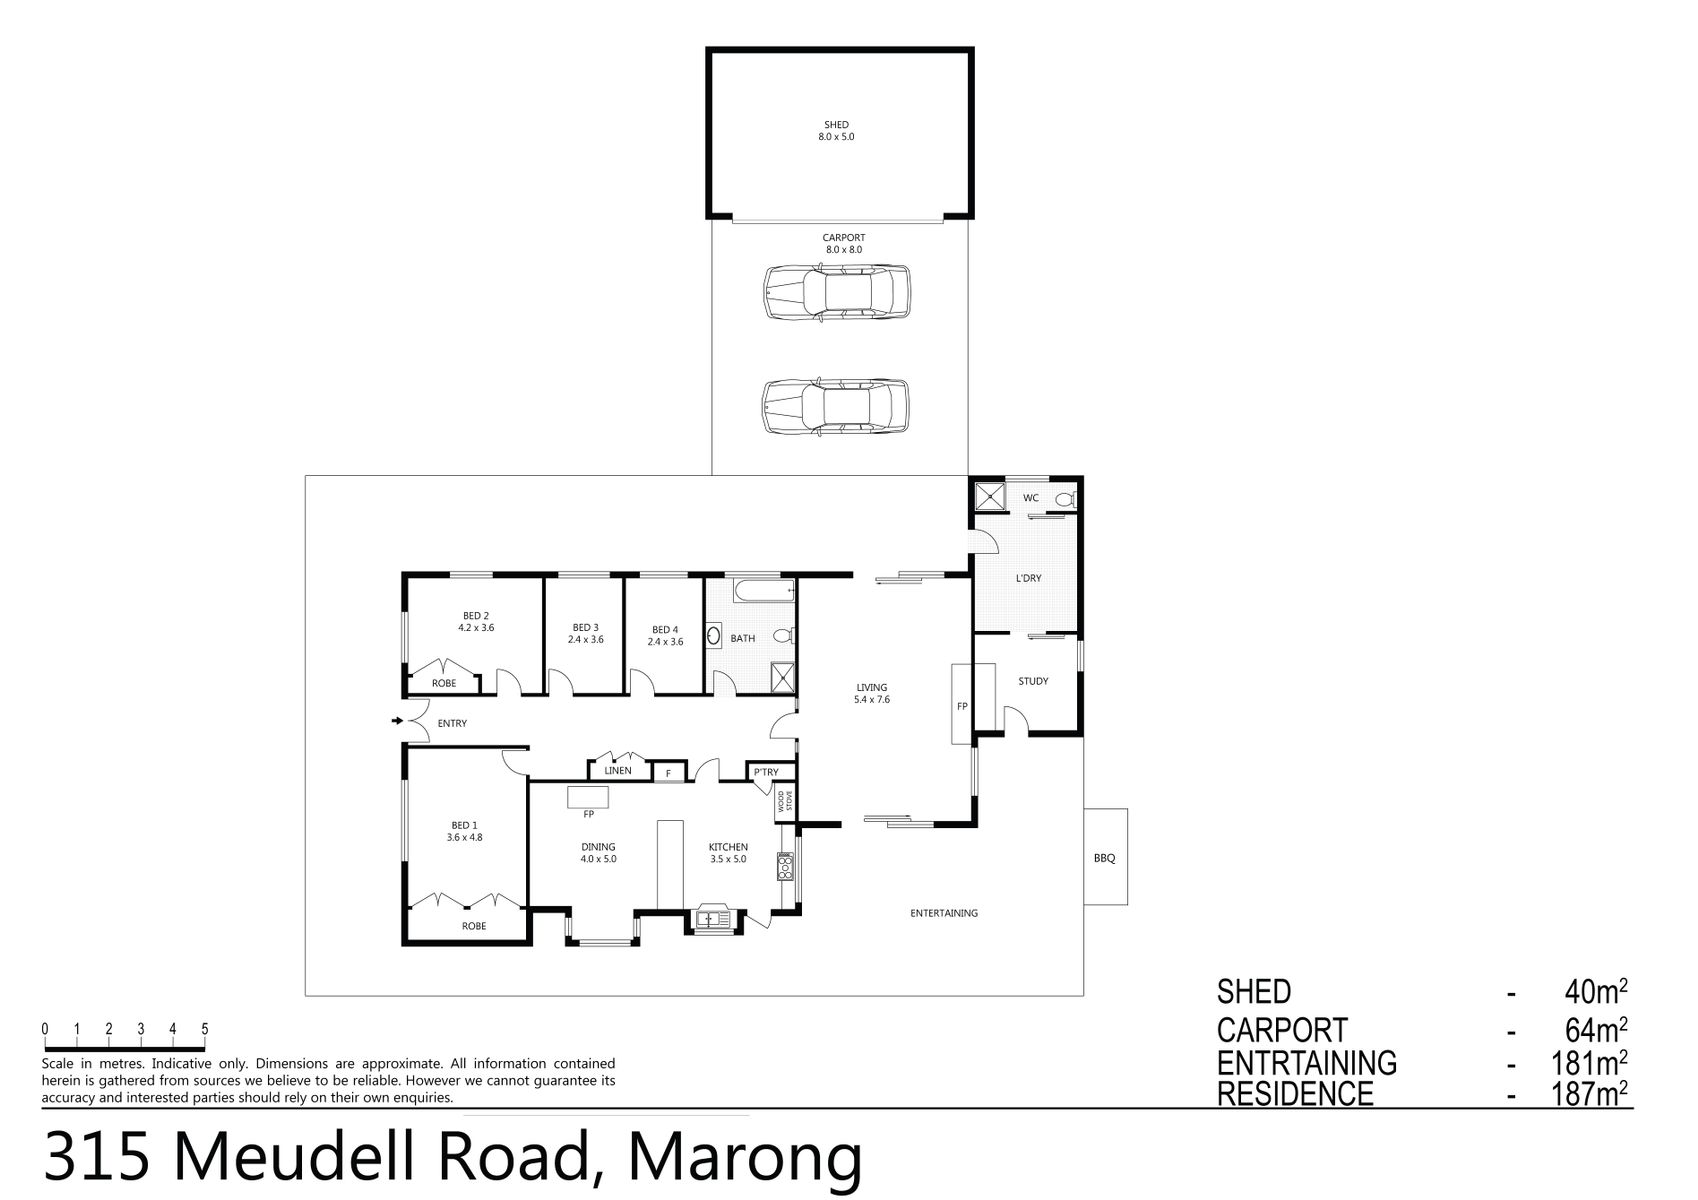 315 Meudell Road, MarongHill (19 MARCH 2018) 187sqm